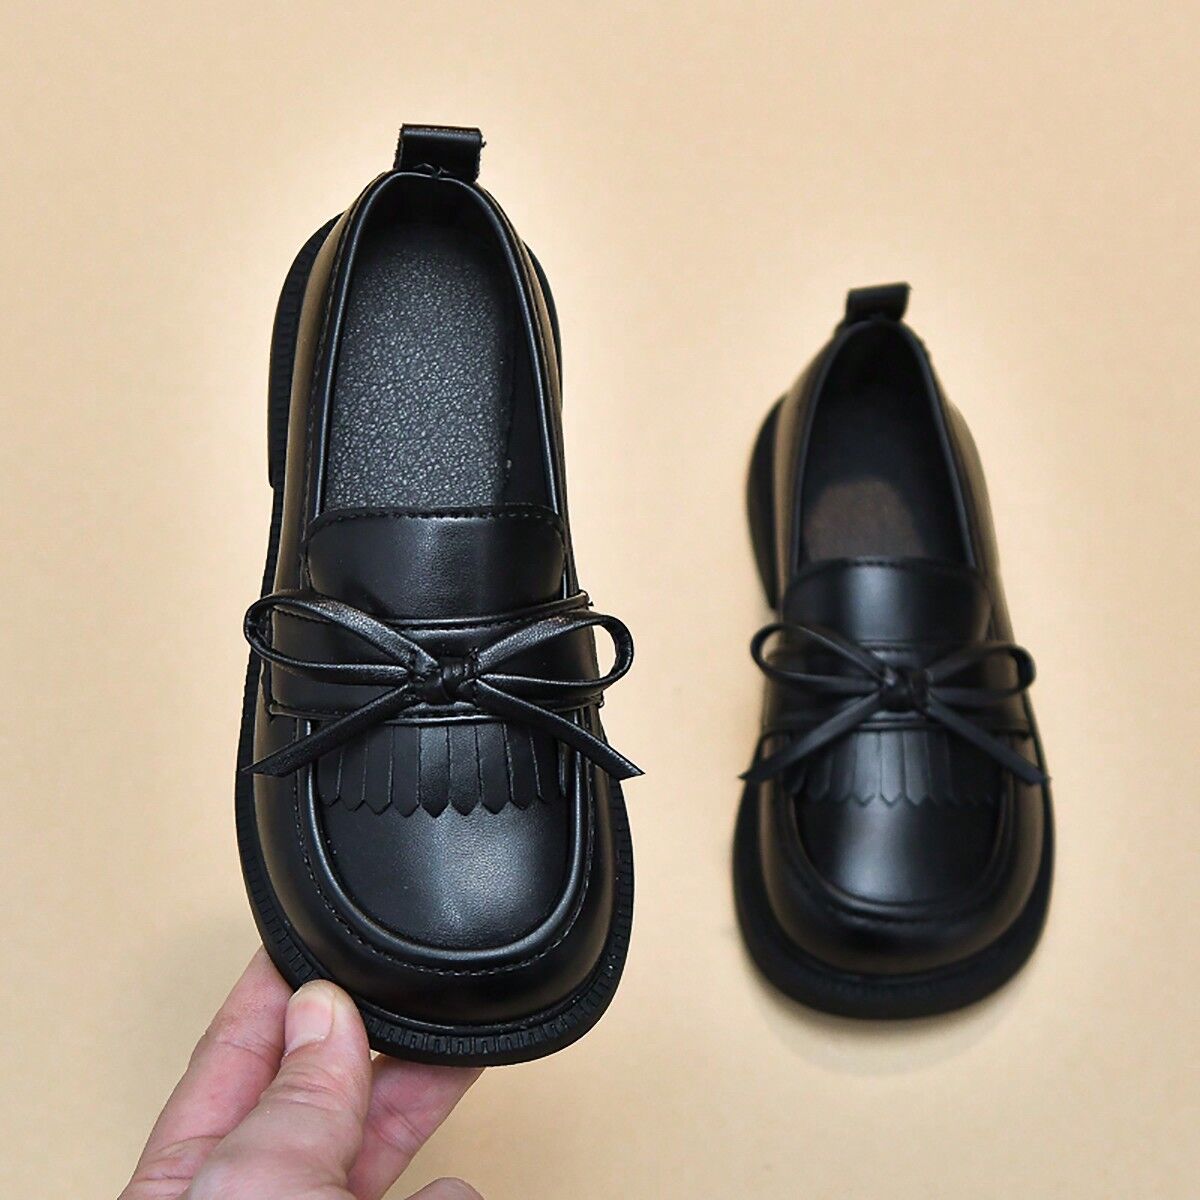 SHEIN Children's Flat Shoes For Girls Dance Shoes Campus New Leather Shoes, British Style Black Flats For Middle And Big Children Black EUR34,EUR35,EUR36,EUR25,EUR26,EUR27,EUR28,EUR29,EUR30,EUR31,EUR32,EUR33